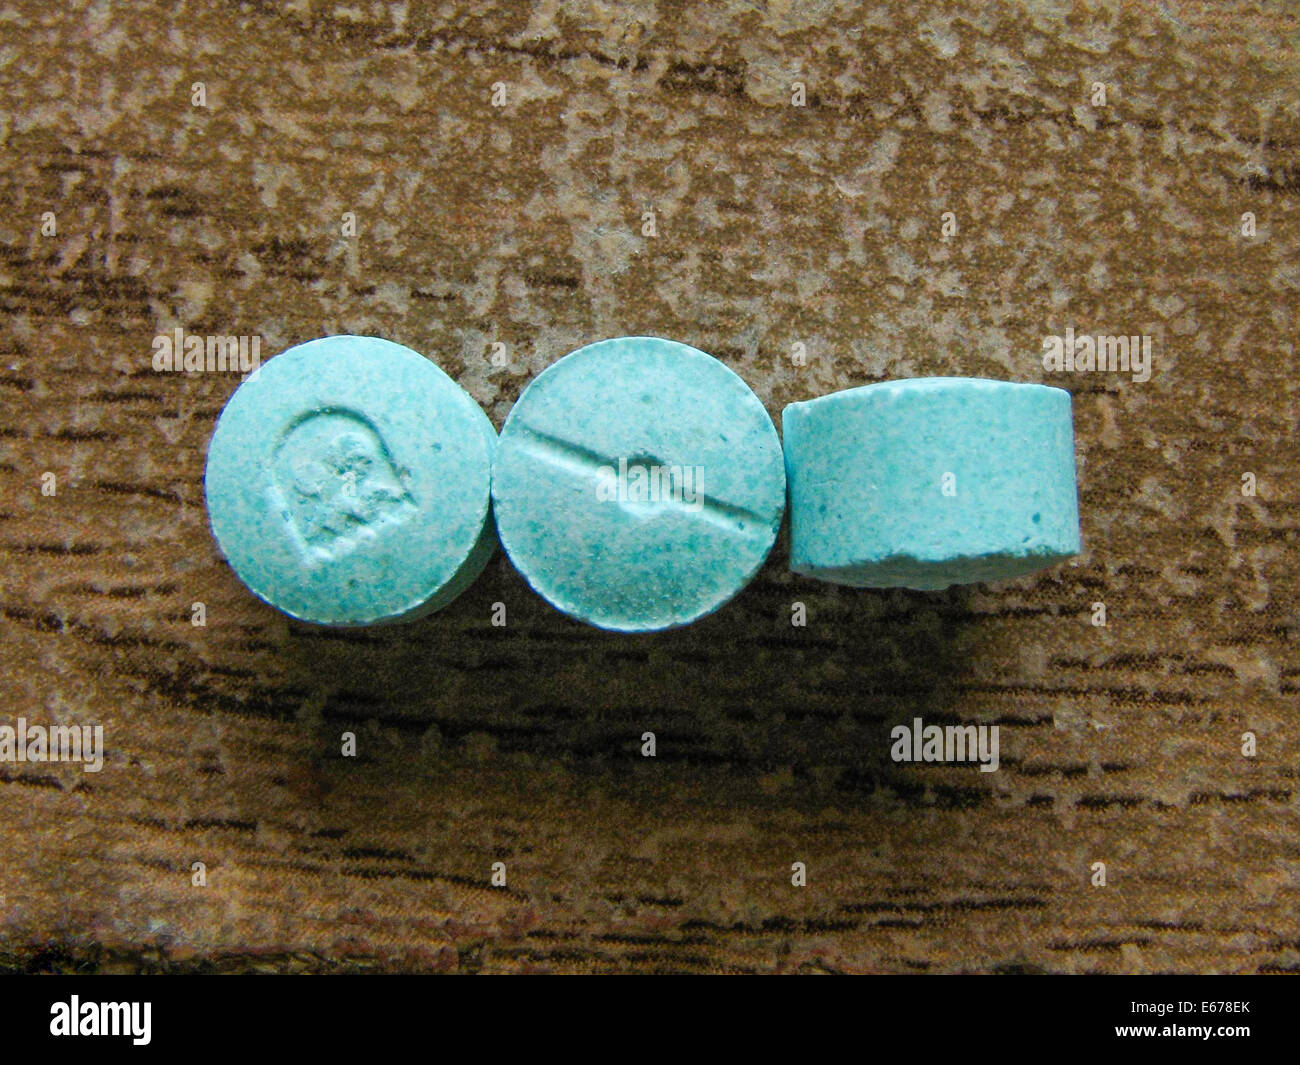 Fake Ecstasy Pills Know As Blue Ghosts Containing Pma See Stock Photo Alamy